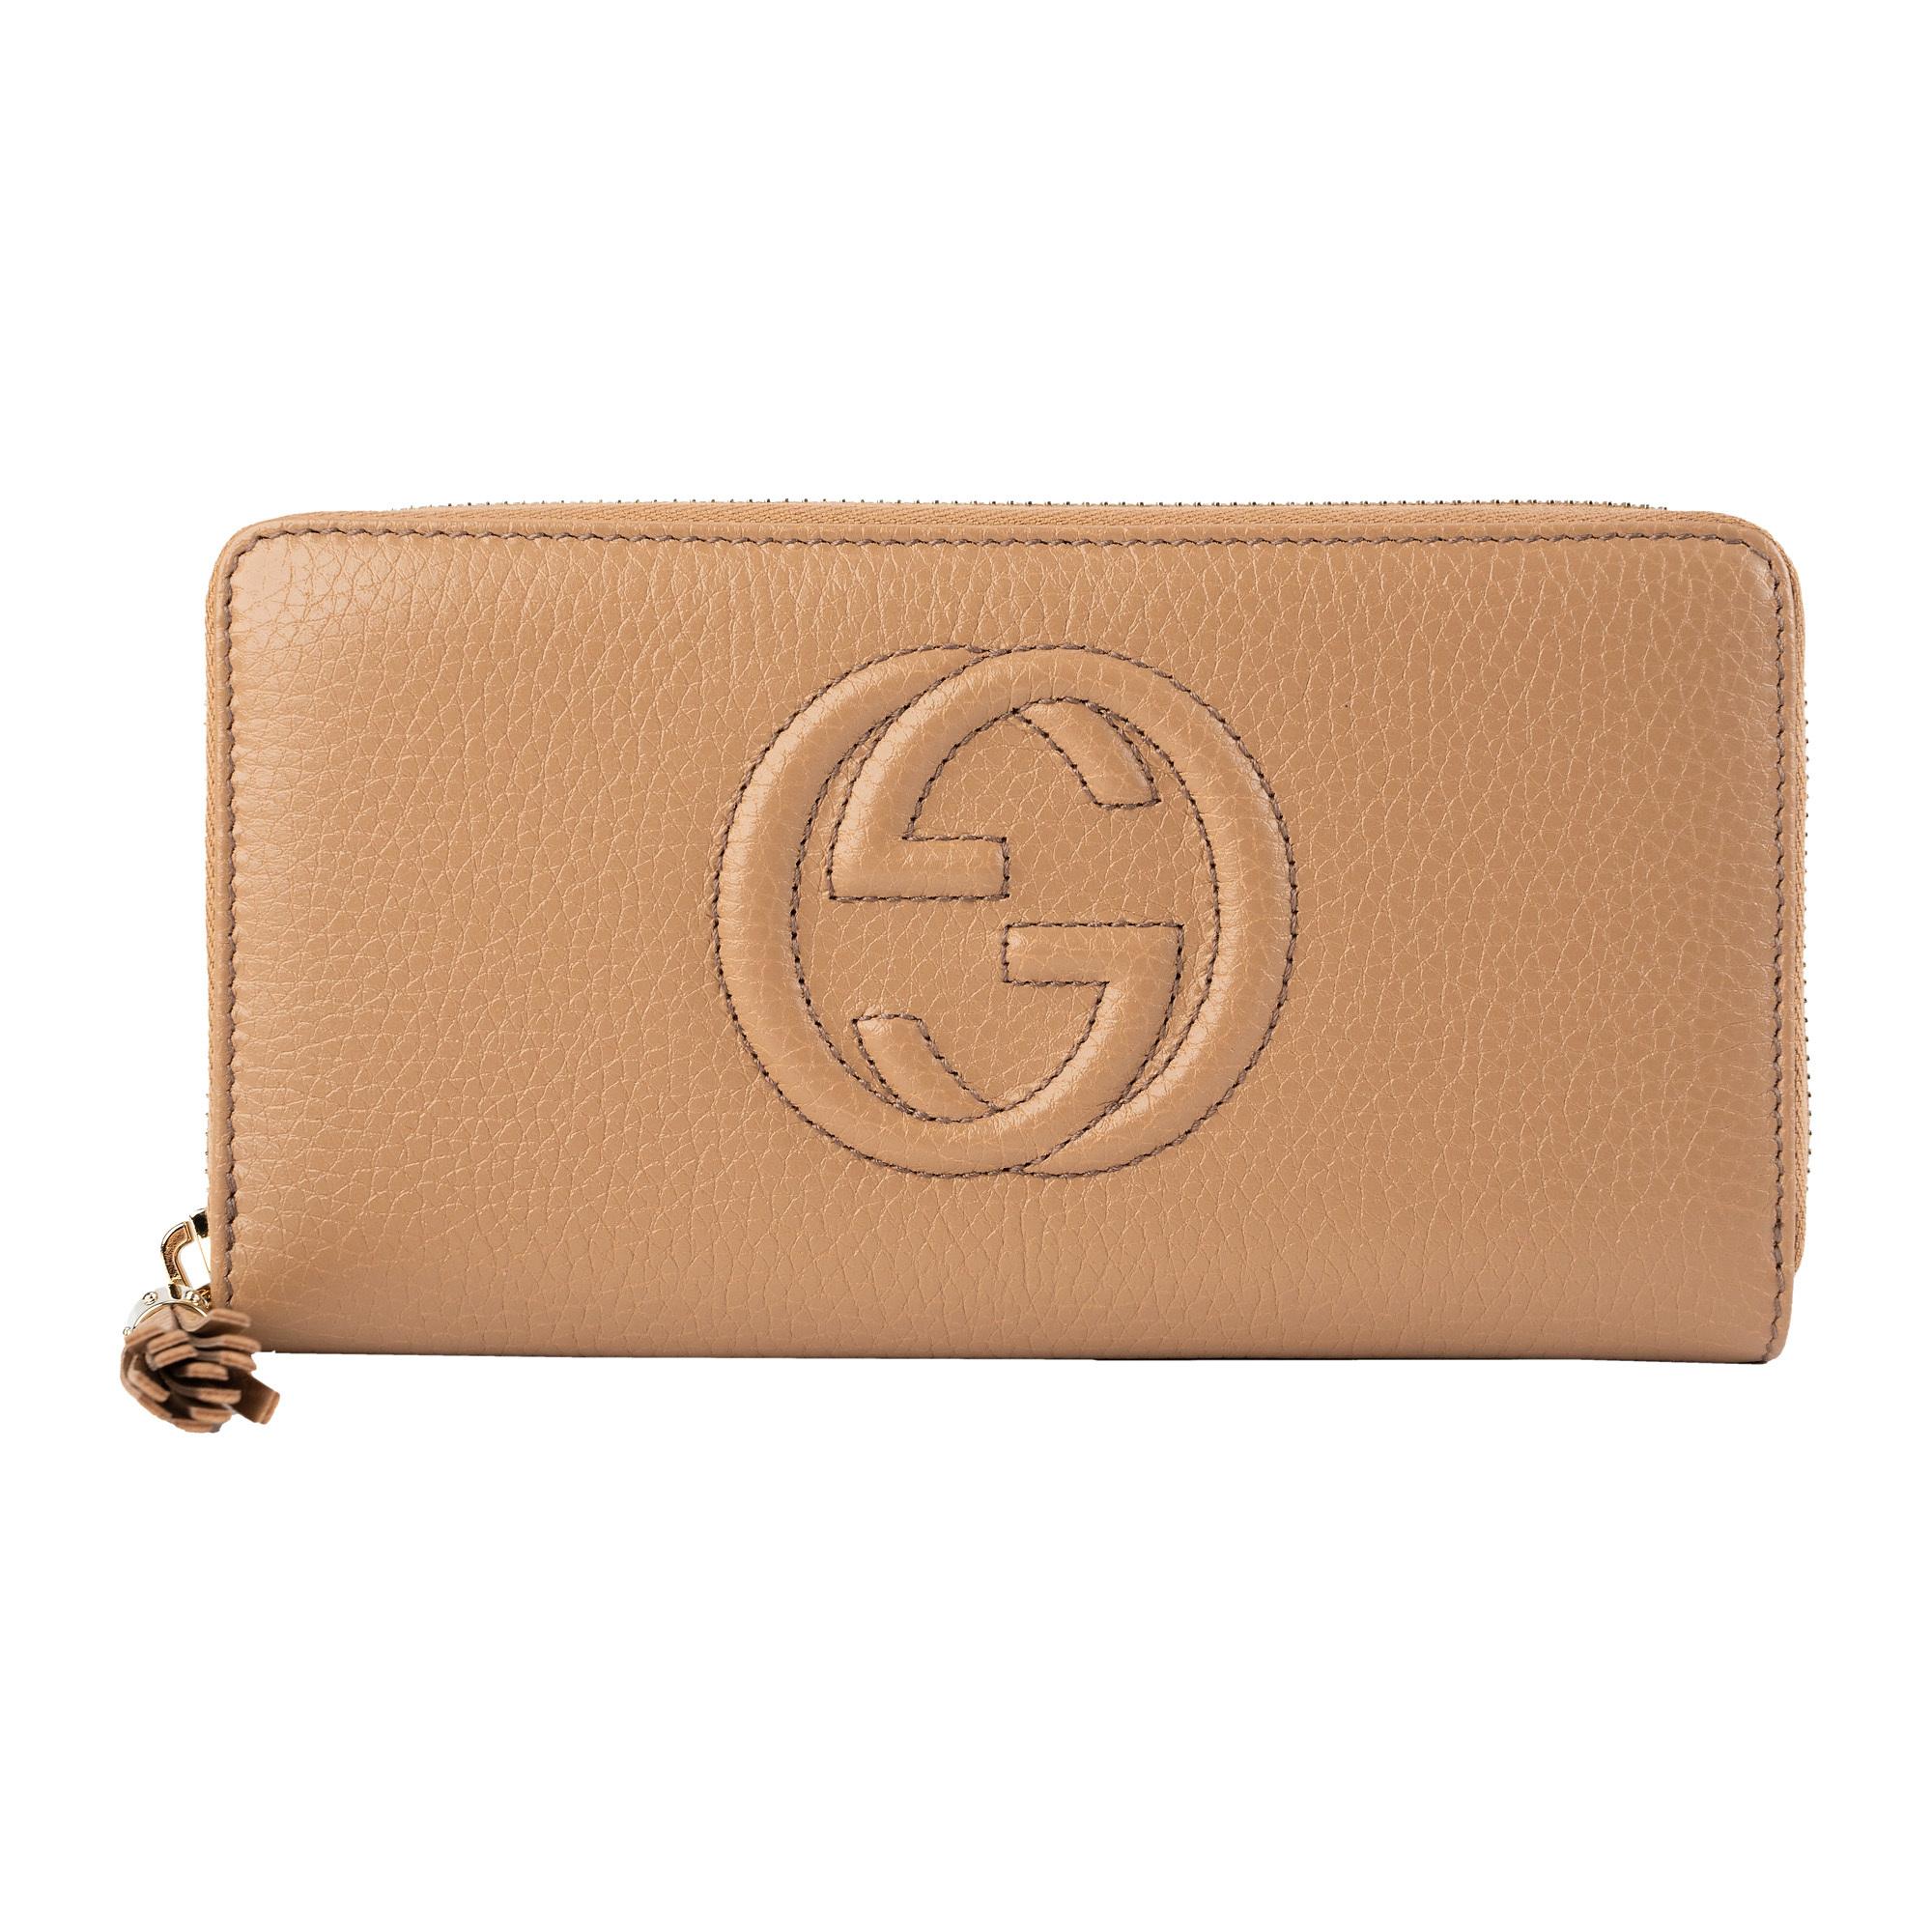 New Gucci Beige Soho Leather Zip Around Long Wallet Clutch Bag

Authenticity Guaranteed

DETAILS
Brand: Gucci
Condition: Brand new
Gender: Women
Category: Clutch
Color: Beige
Material: Leather
Gucci soho logo
Gold-tone hardware
Zip around closure
3